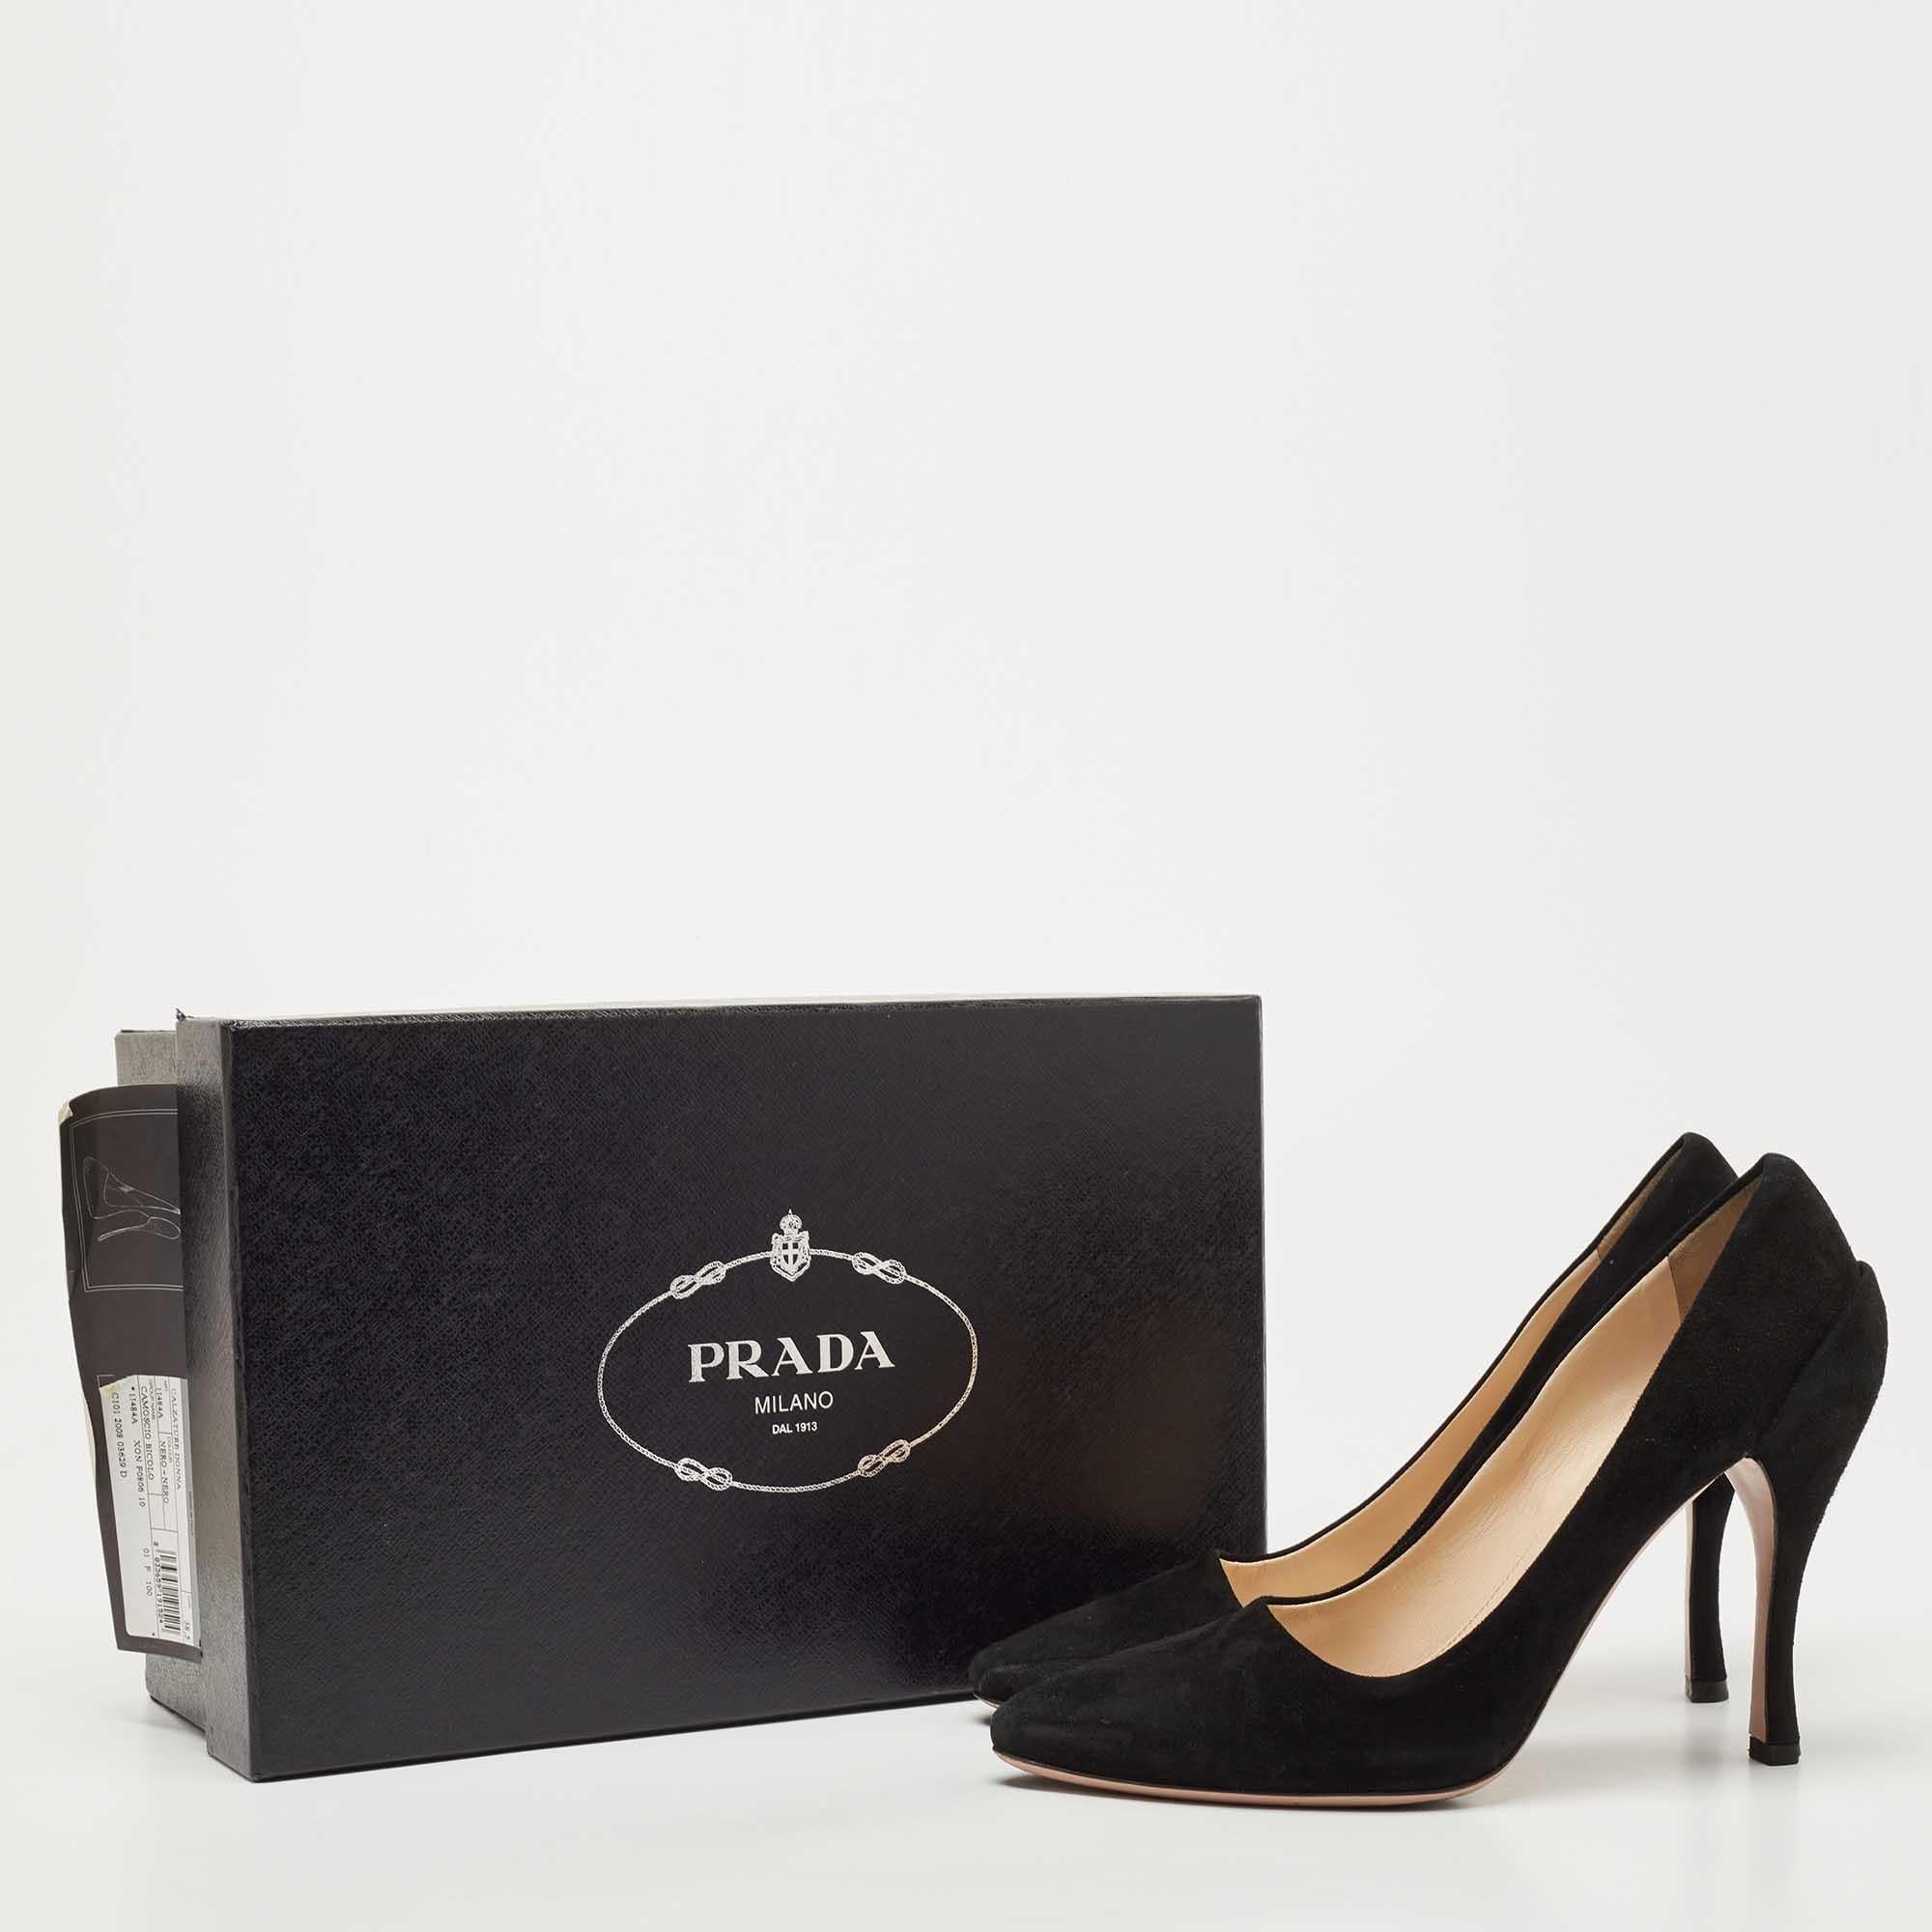 Prada Black Suede Pointed Toe Pumps Size 38.5 For Sale 5